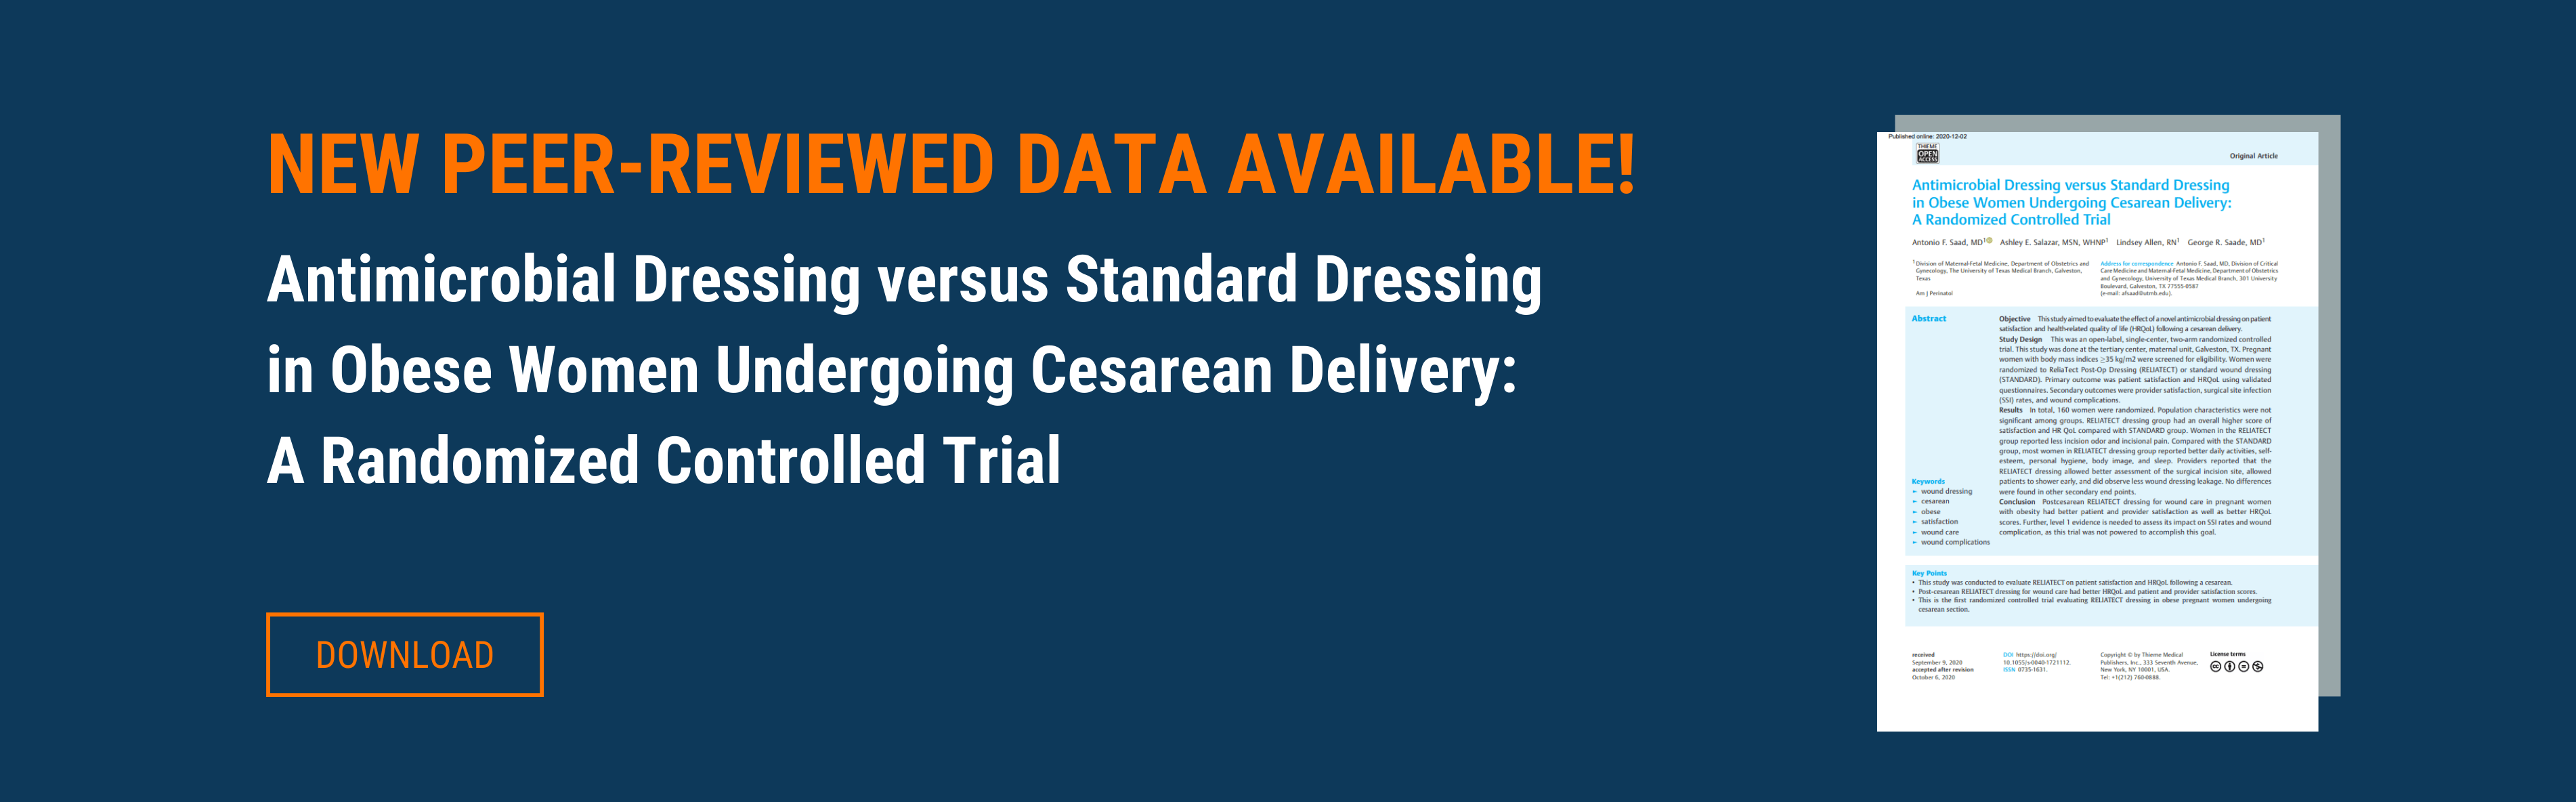 text: new peer-reviewed SSI data available learn more